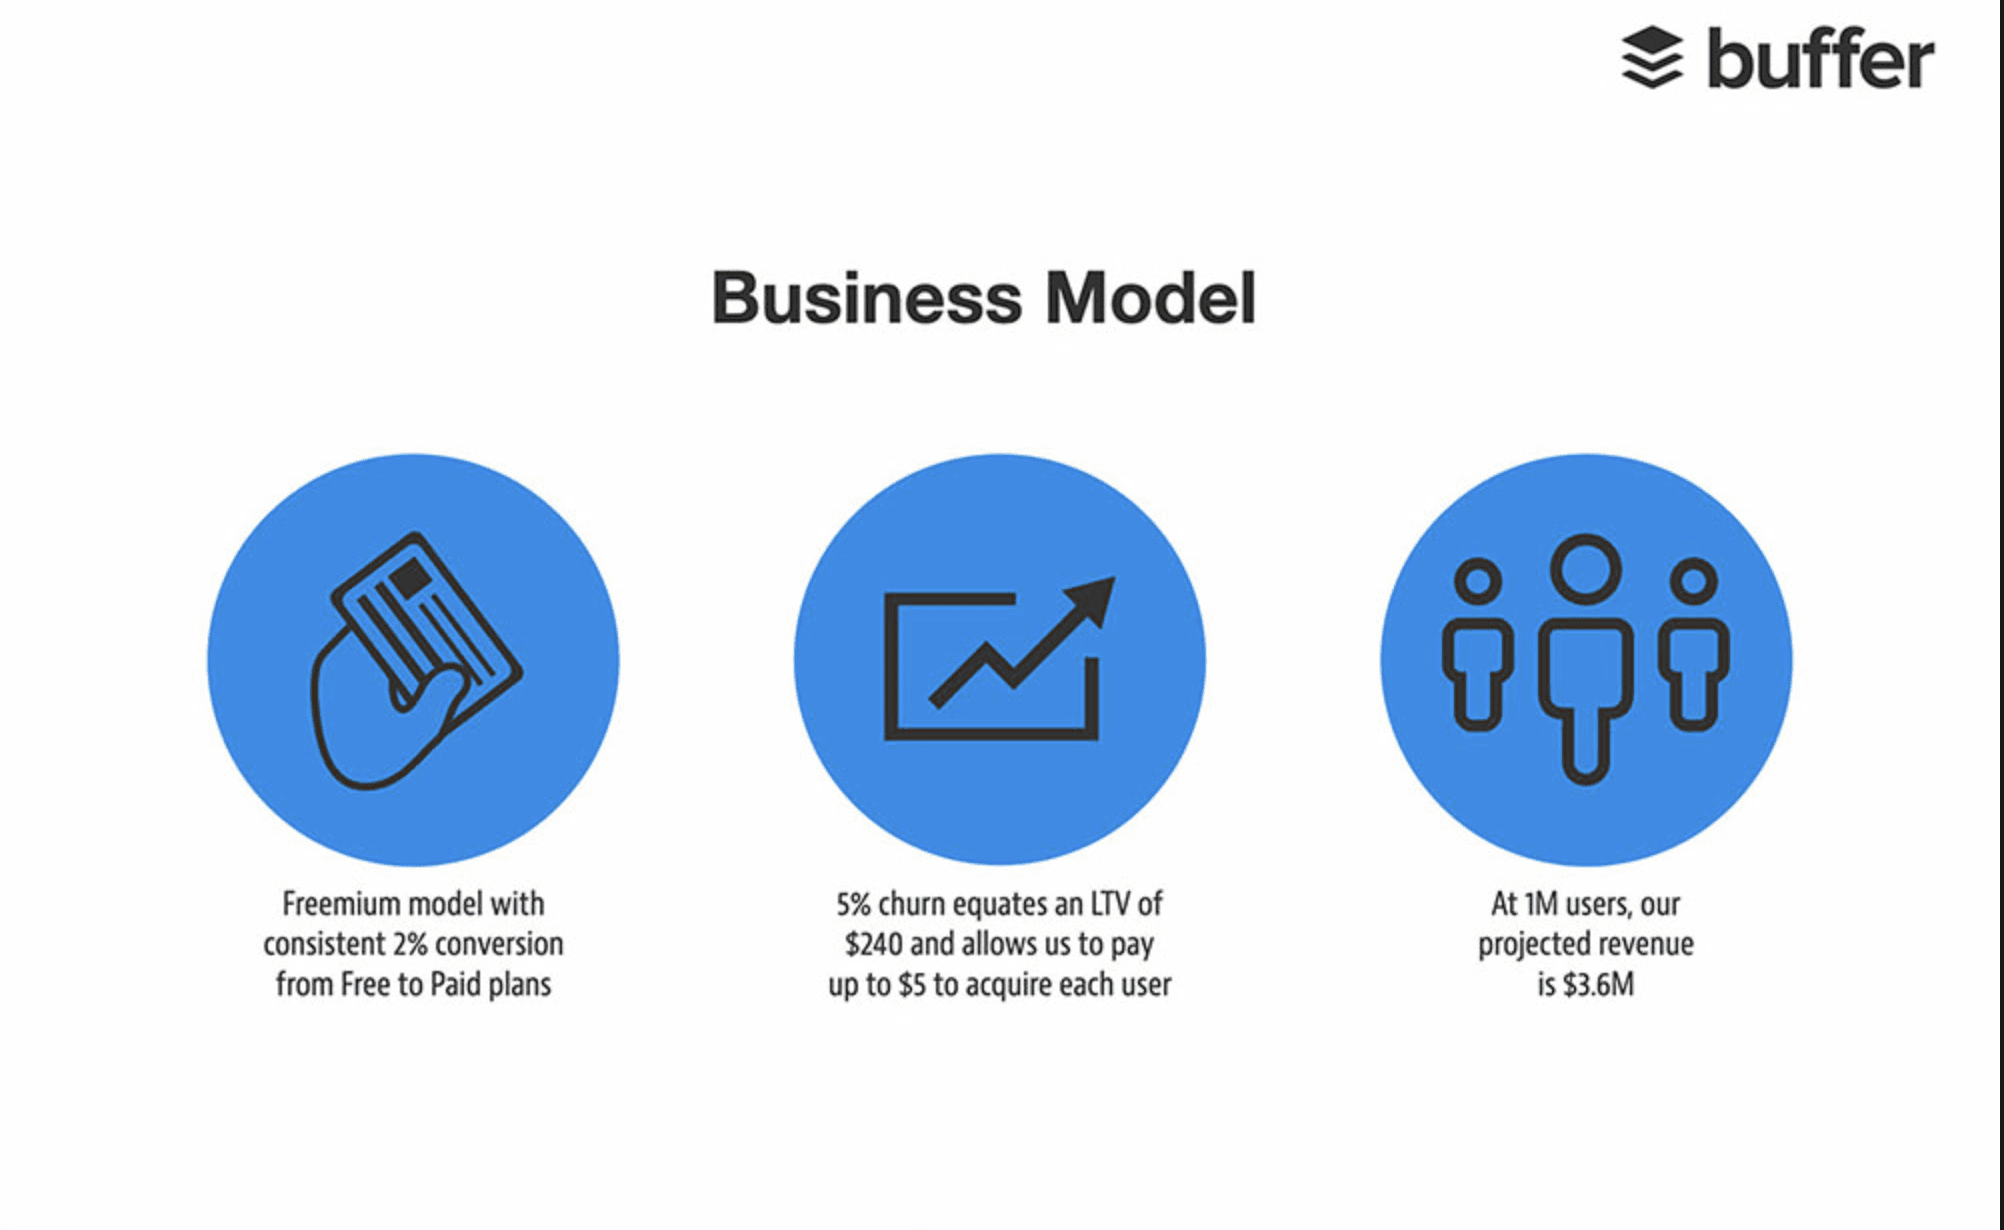 How to show in presentations the business model for securing investment